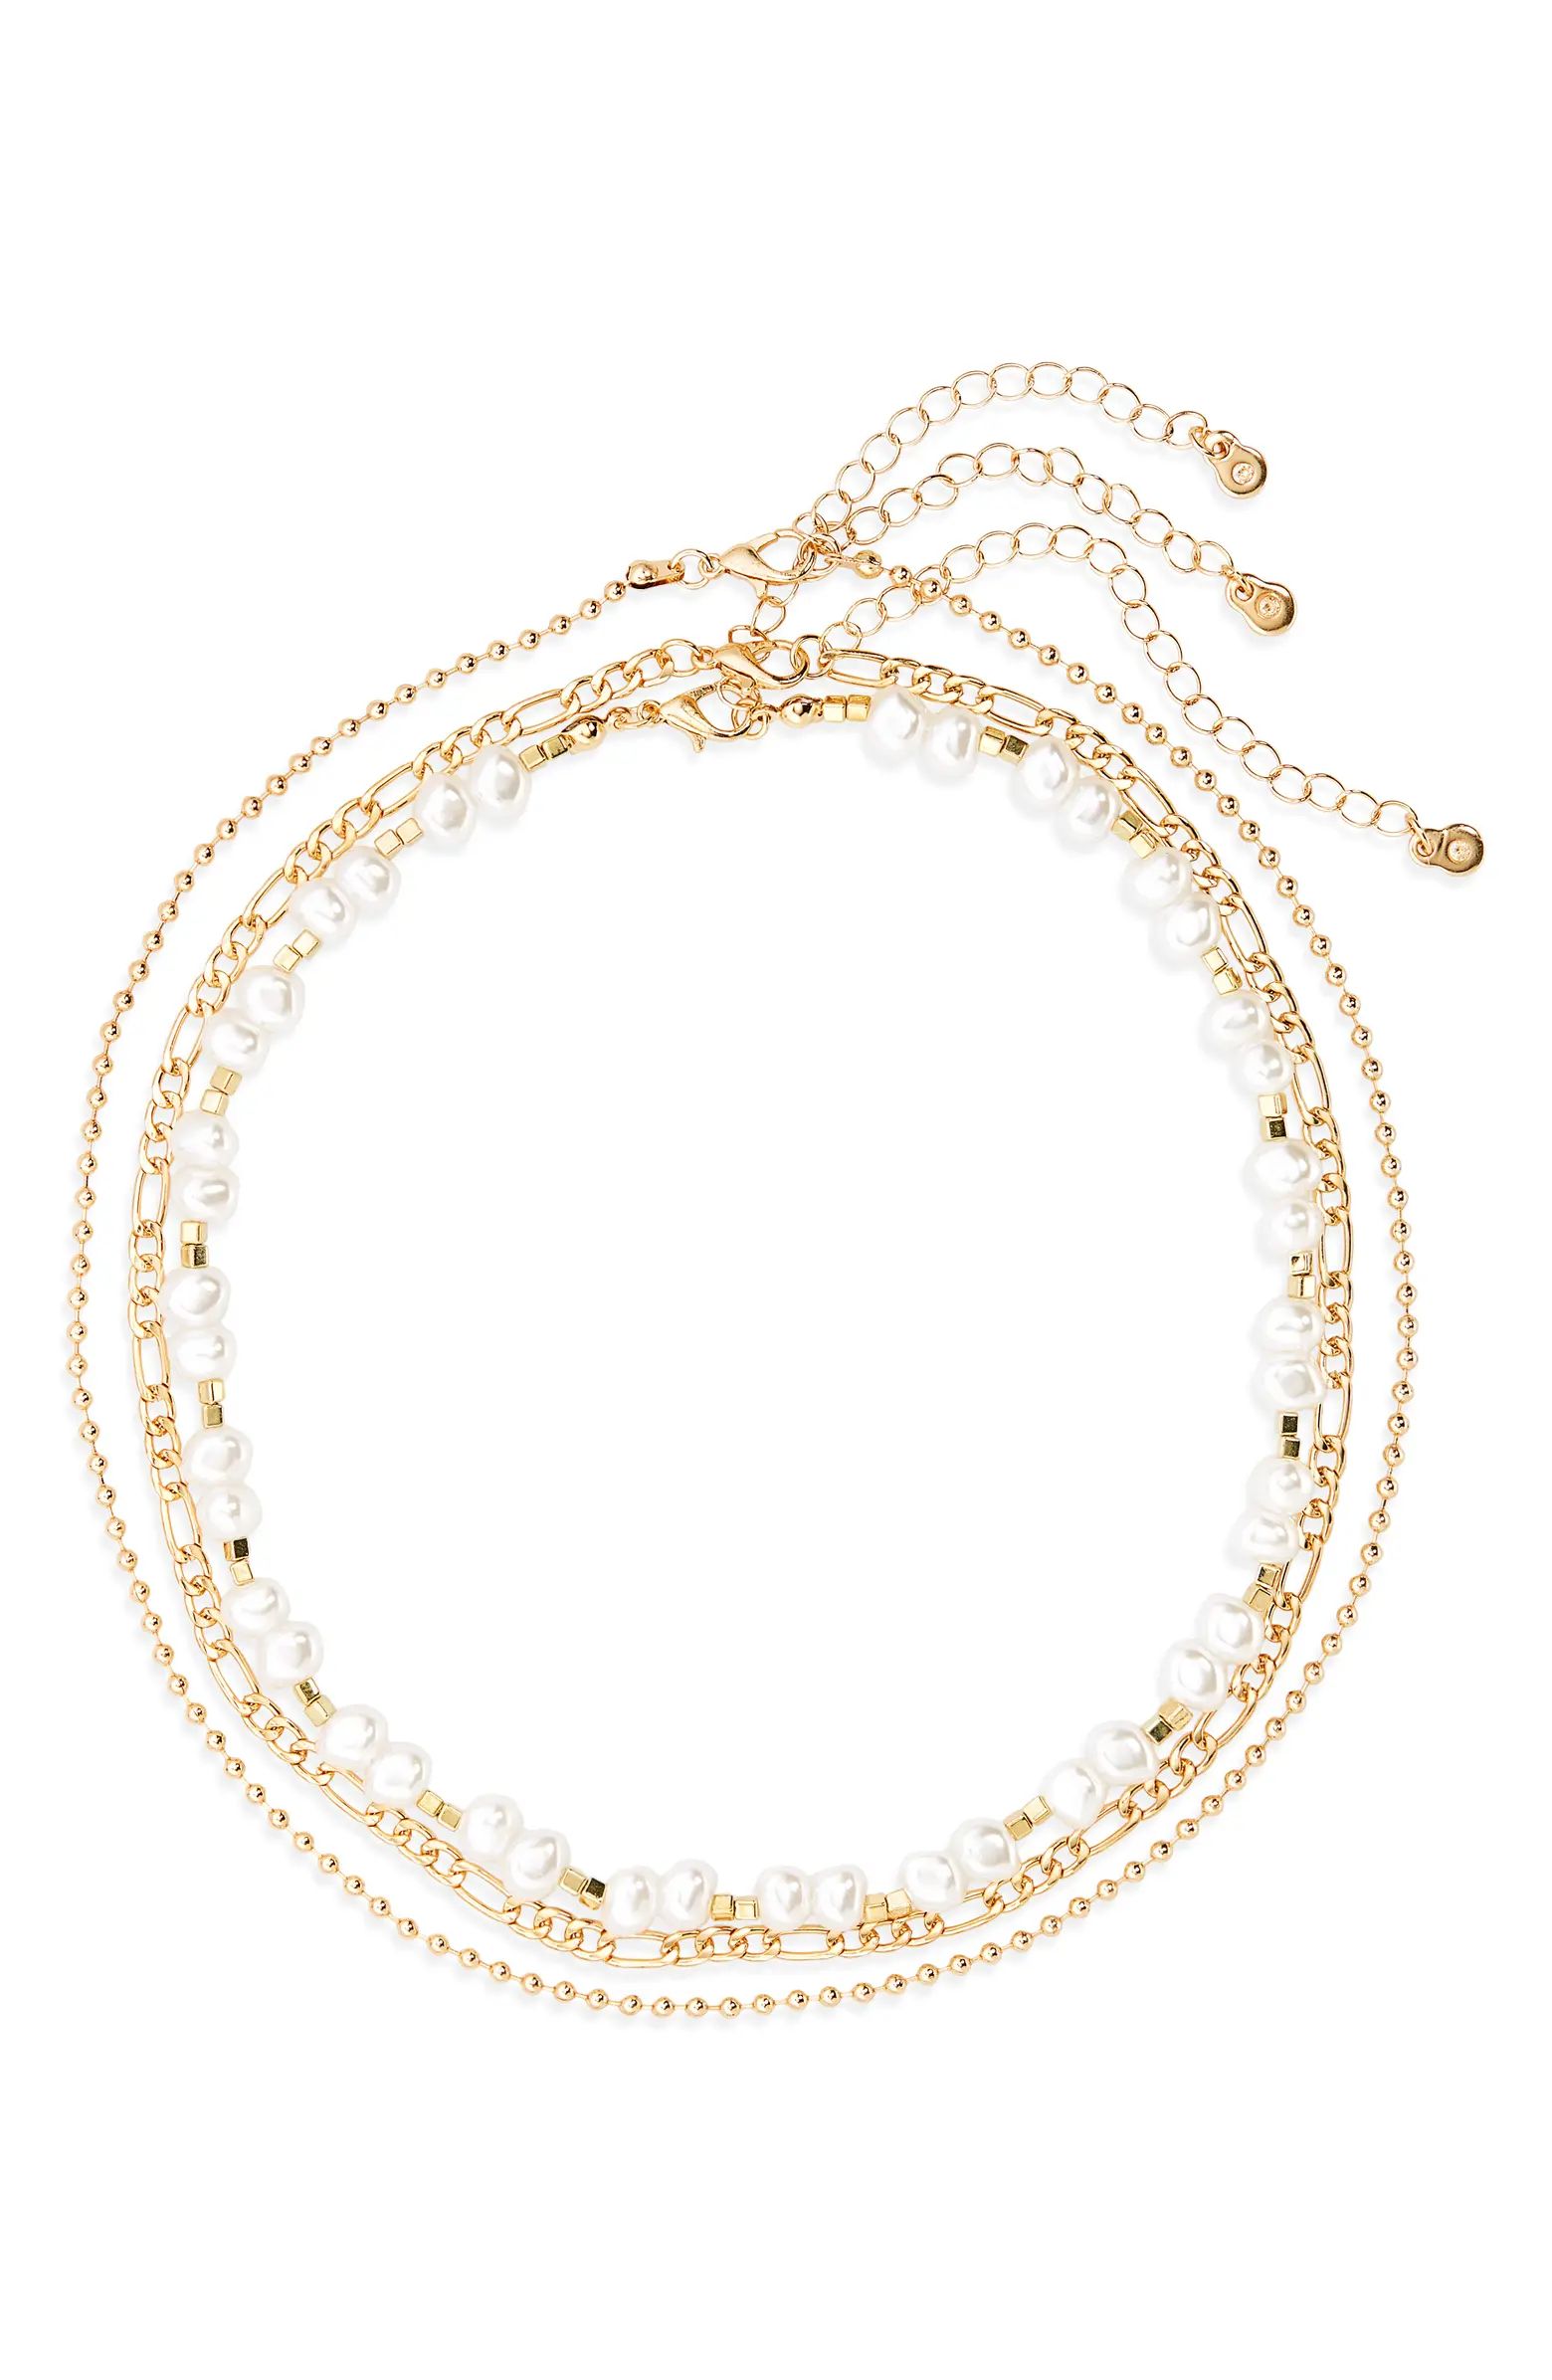 Set of 3 Chain and Imitation Pearl Necklaces | Nordstrom